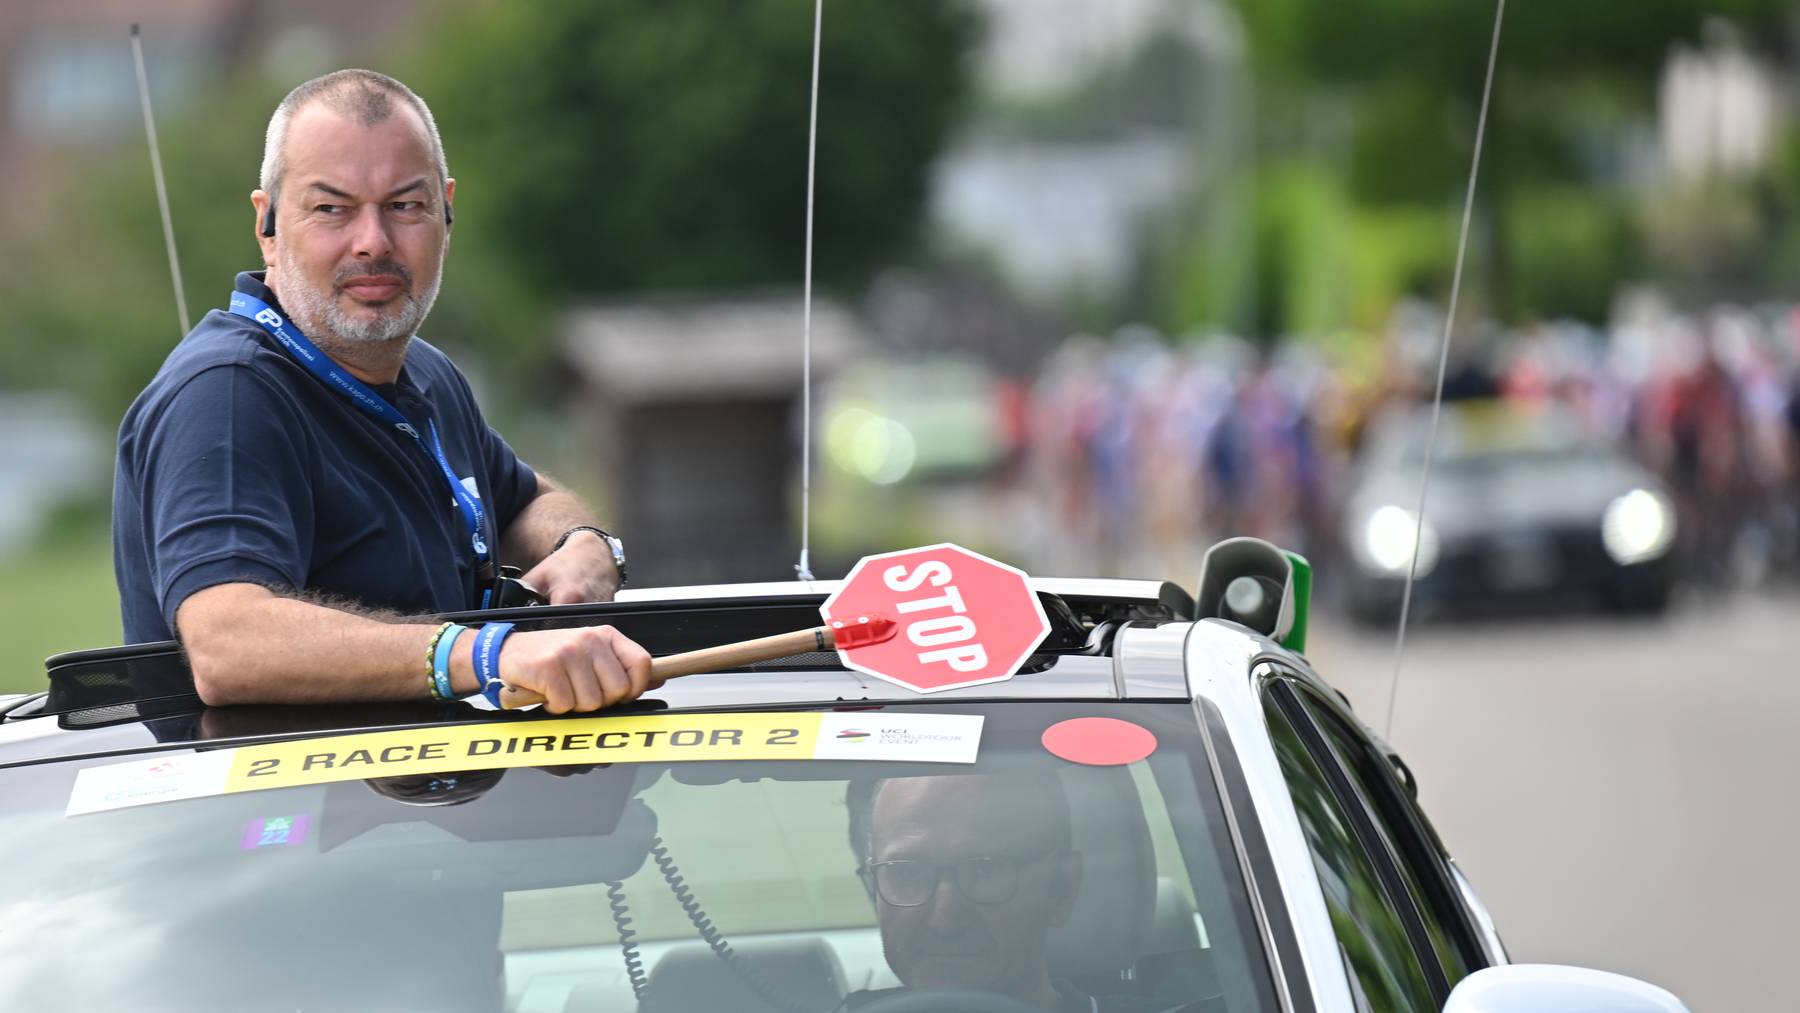 Race director Olivier Senn during the second stage, a 199 km race from Kuesnacht to Aesch, at the 85th Tour de Suisse UCI ProTour cycling race, on Monday, June 13, 2022.